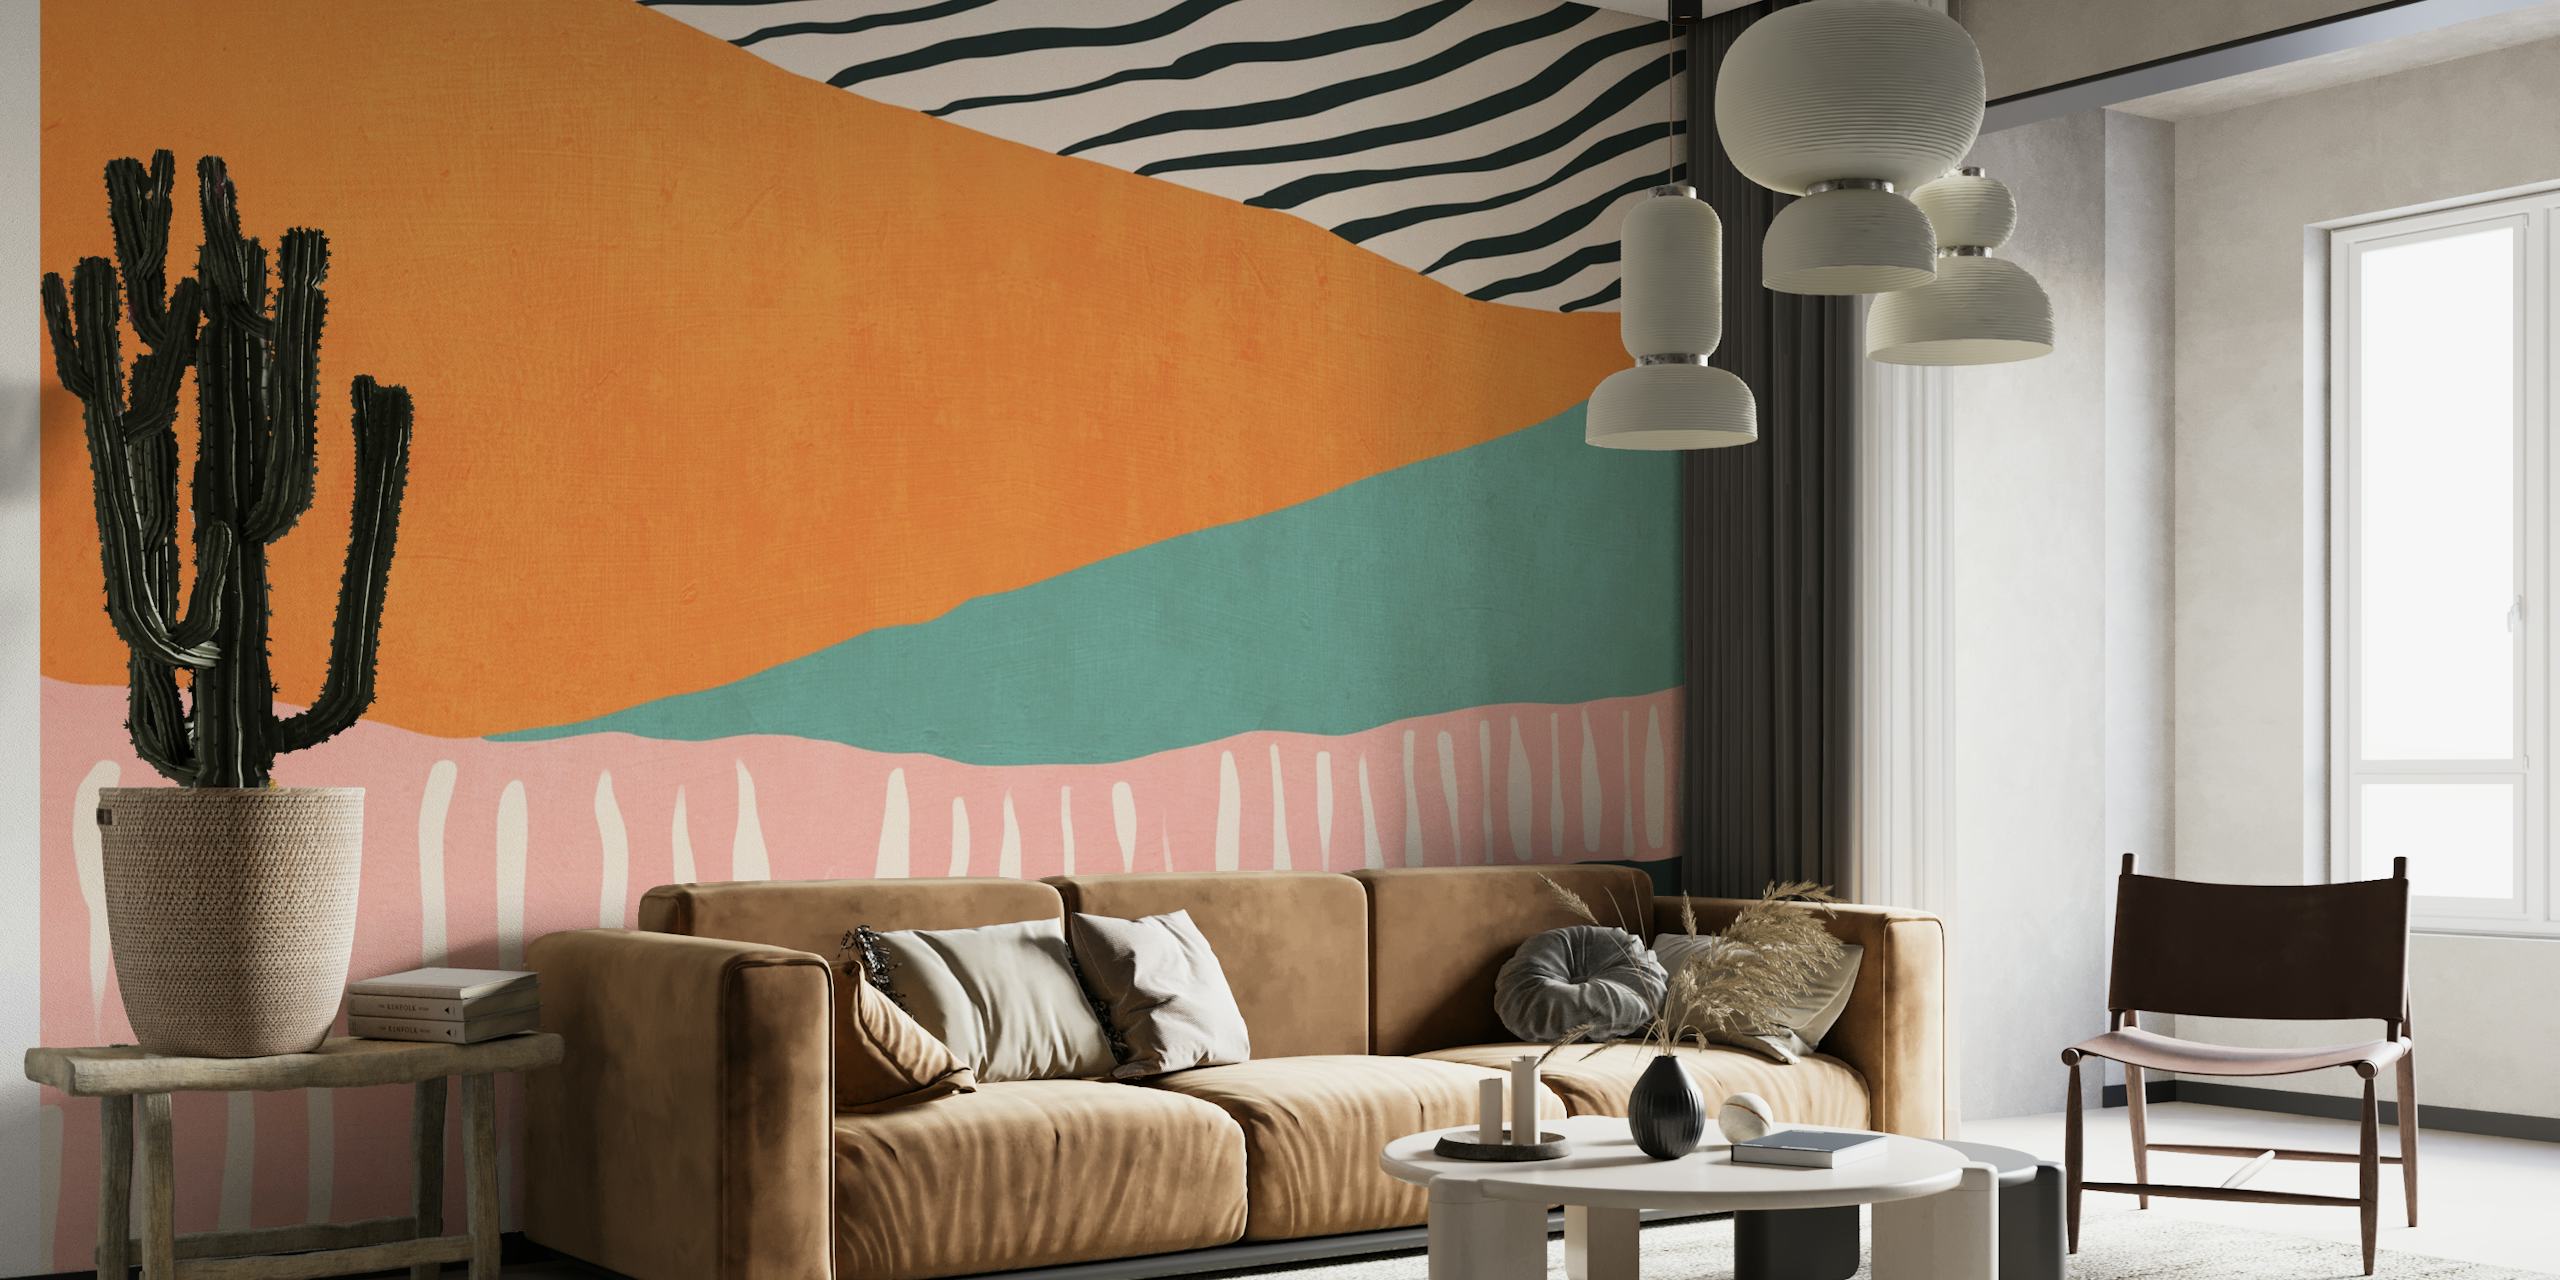 Abstract striped wall mural with orange, turquoise, pink, and green patterns